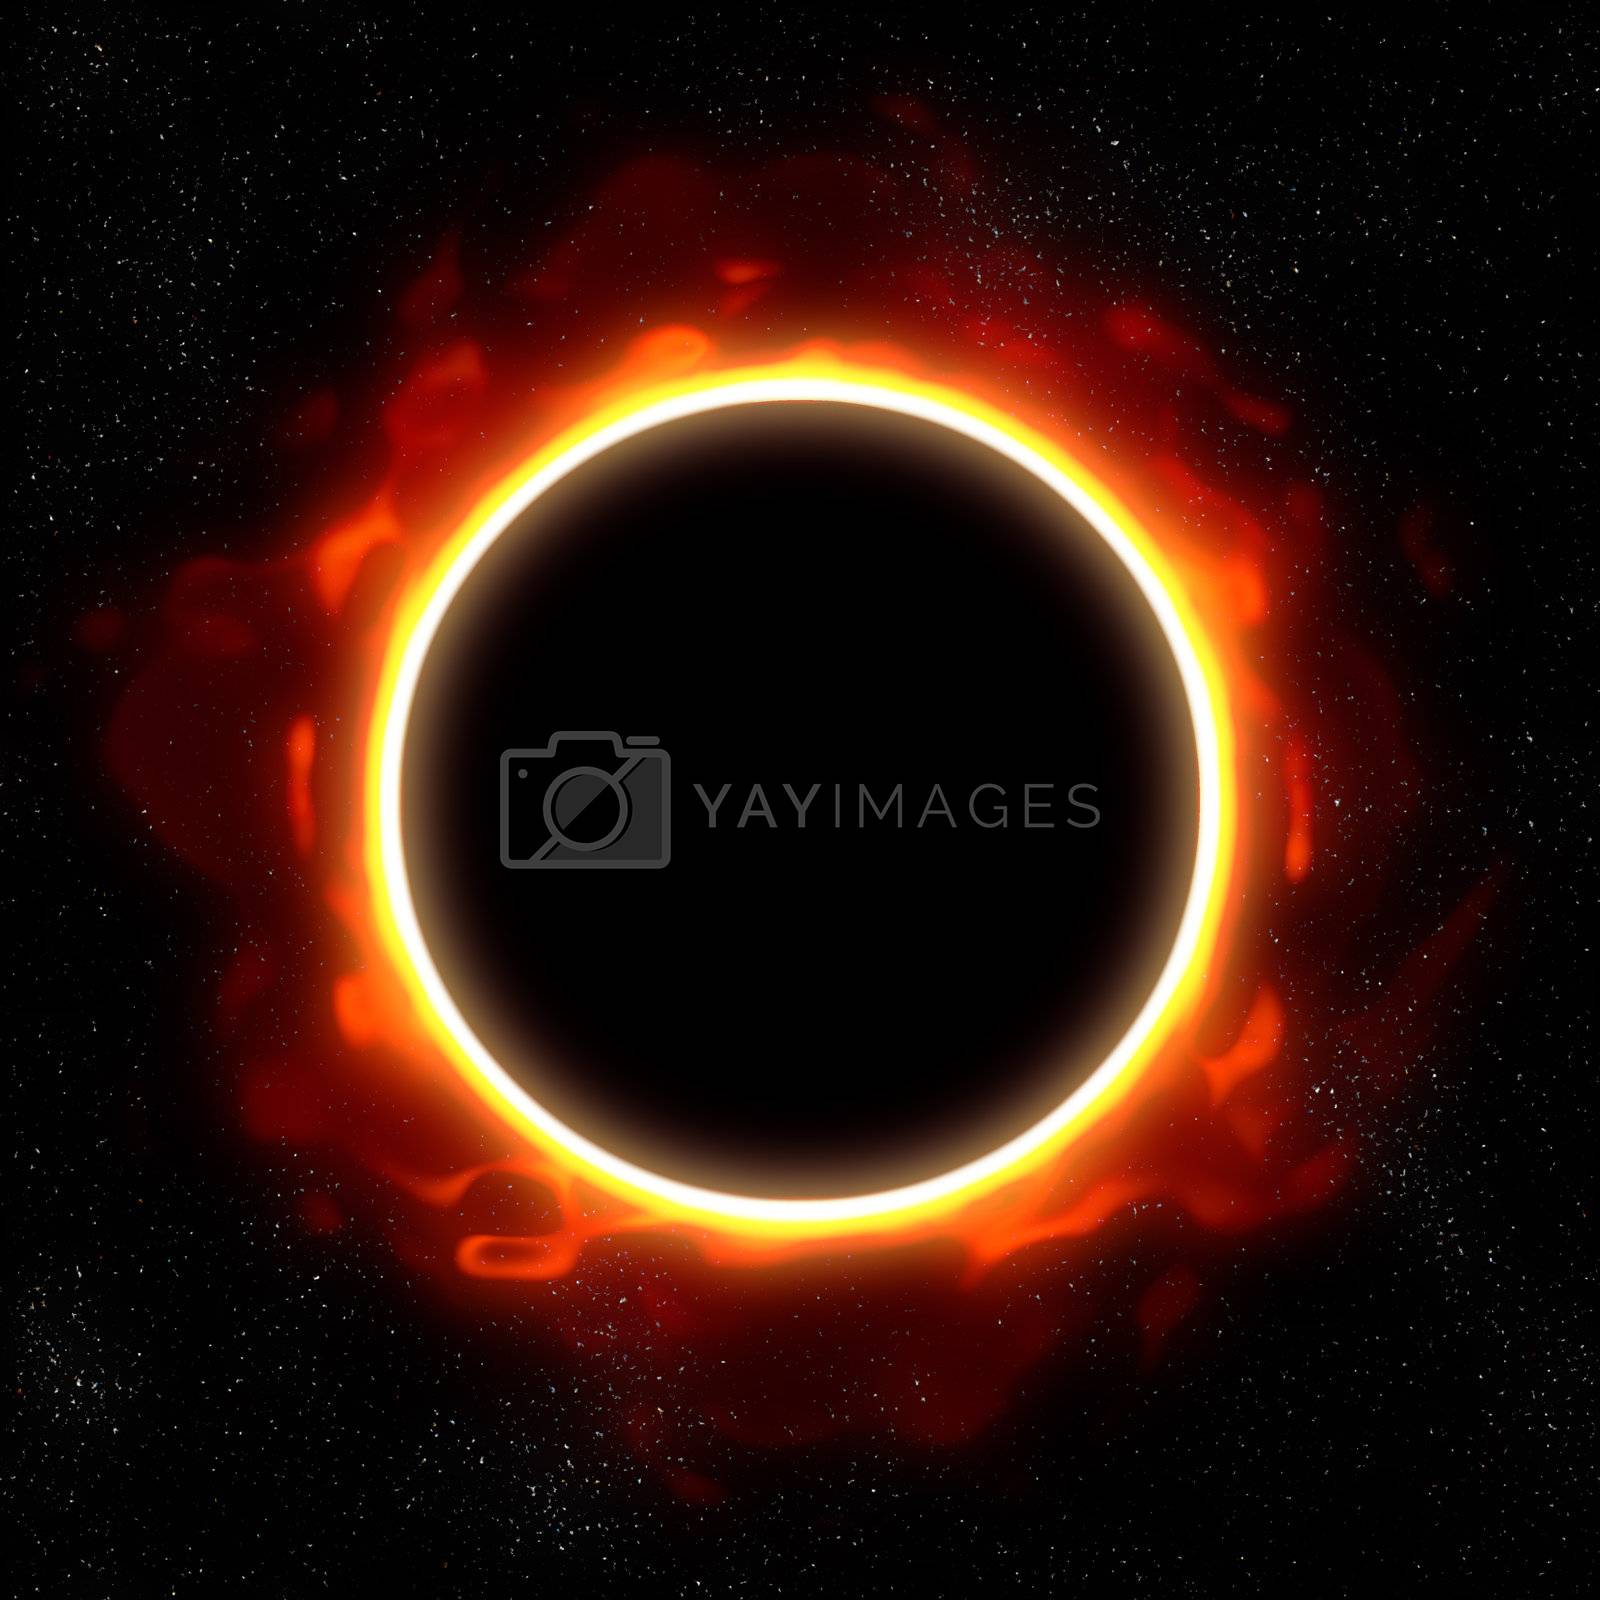 Royalty free image of total eclipse in space by clearviewstock